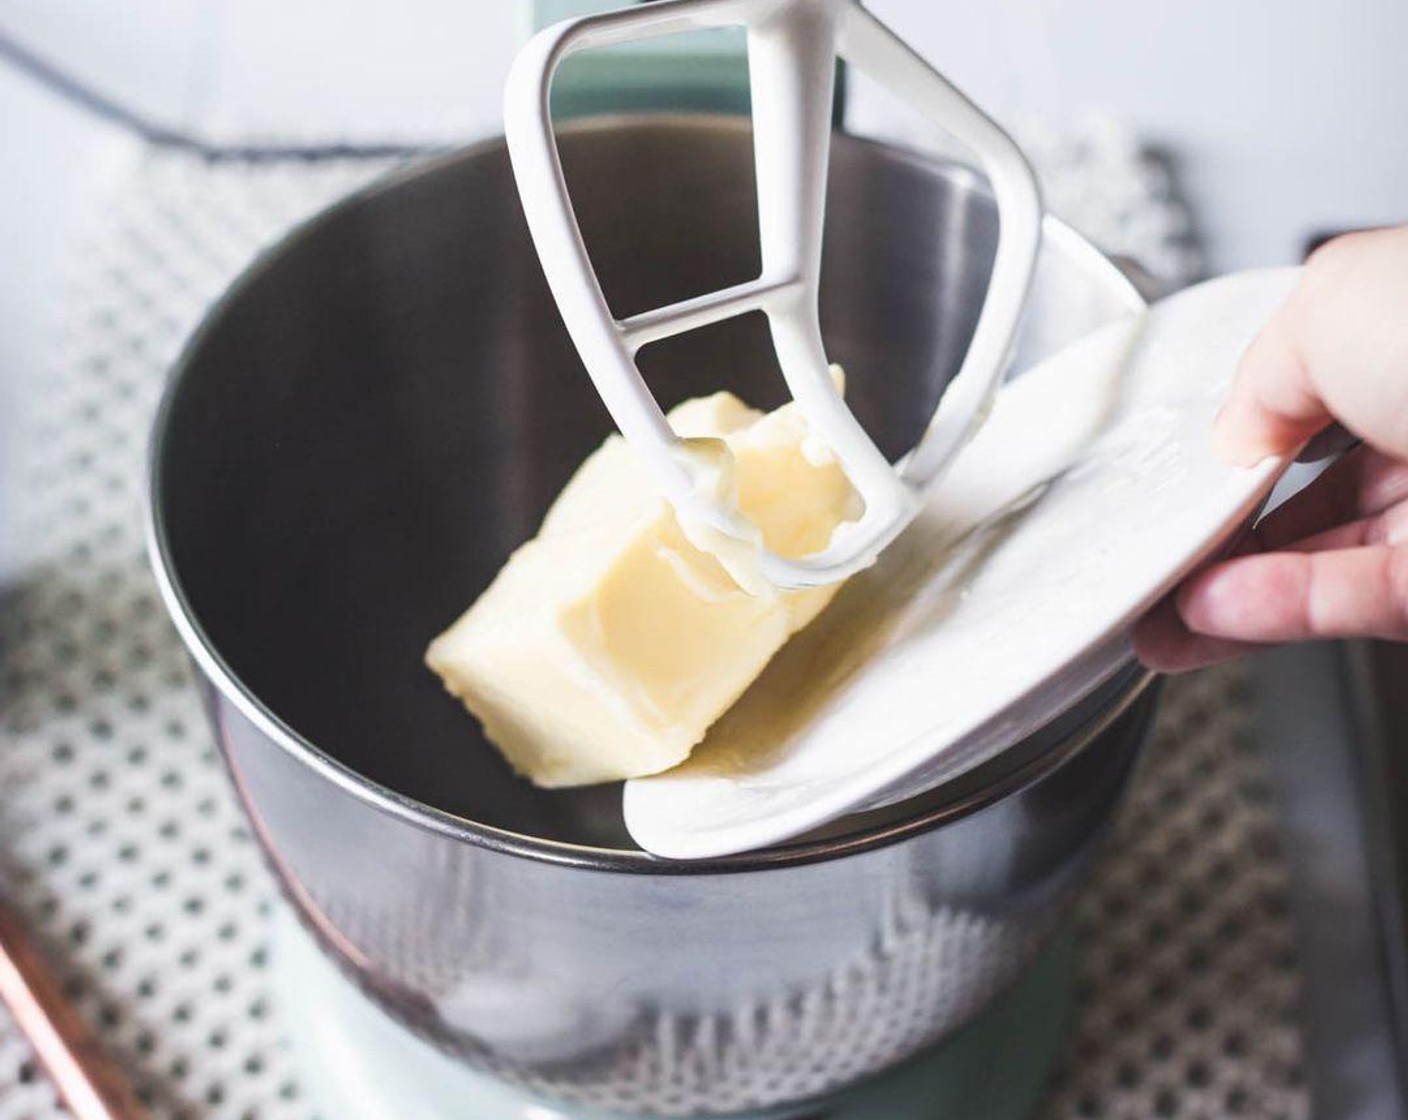 step 2 In a standing mixer with a paddle attachment, mix the Butter (1 cup), Oil (1/4 cup), Granulated Sugar (1 1/2 cups) and Vanilla Extract (1/2 Tbsp) and Almond Extract (1 tsp) together until smooth and fluffy.